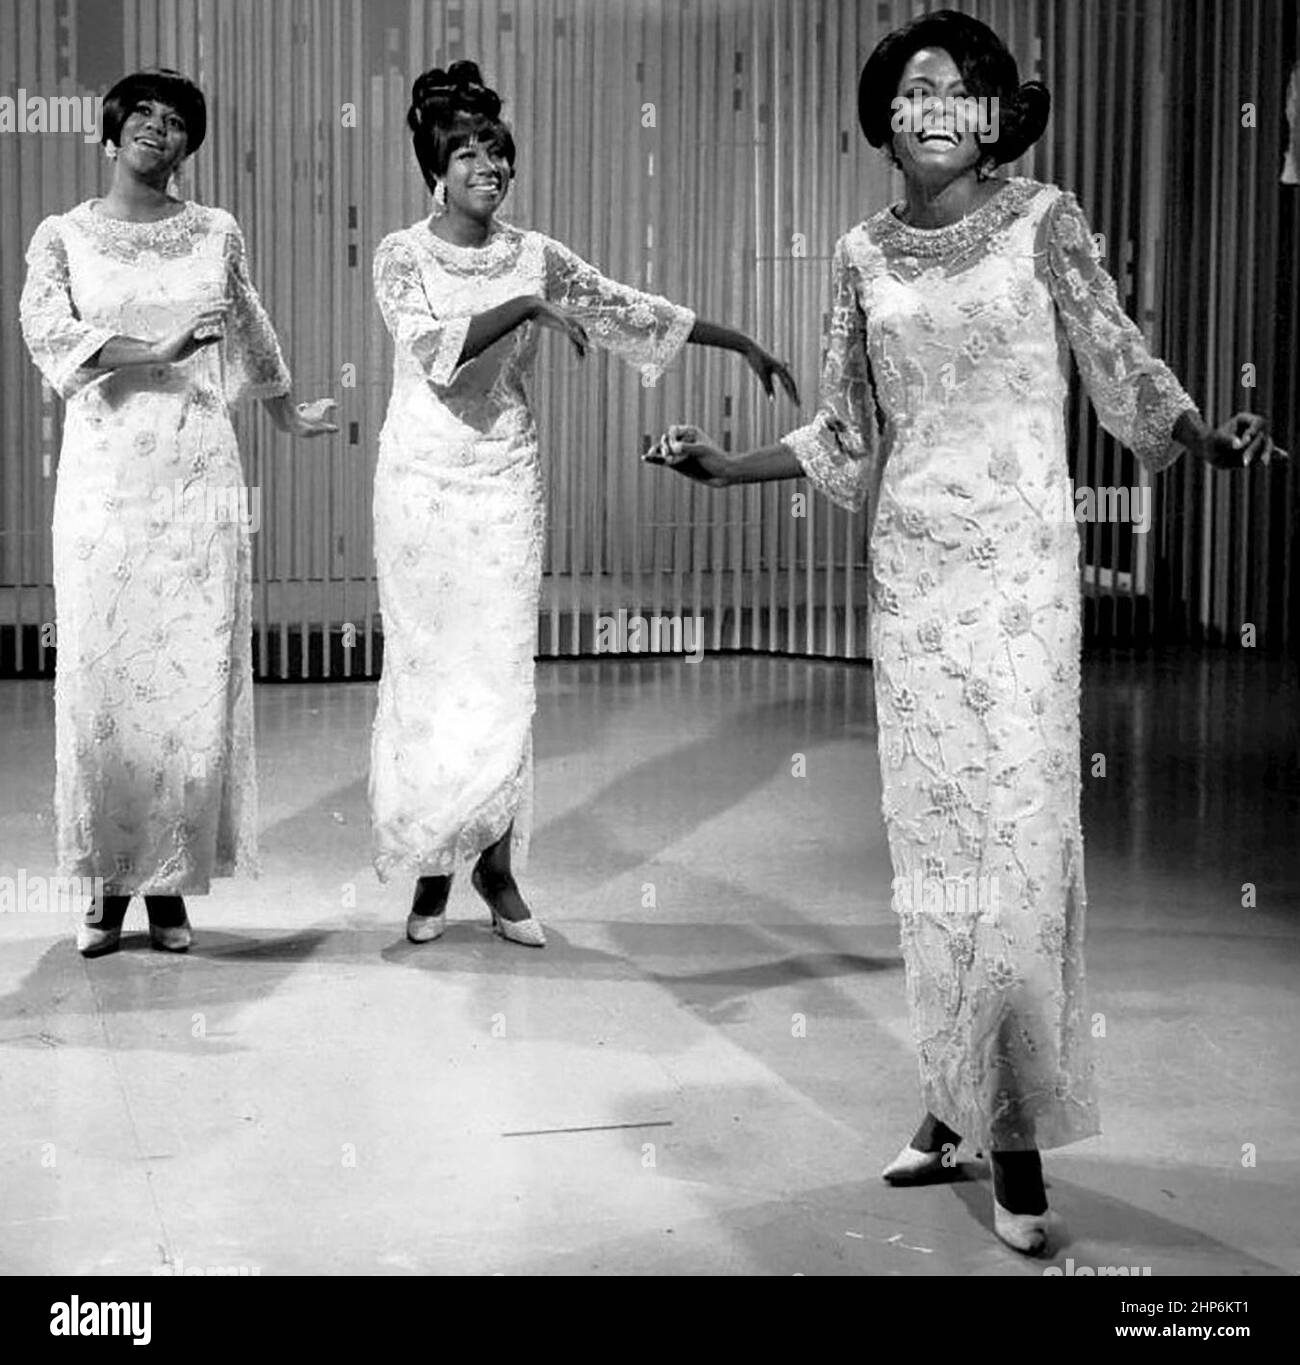 Publicity photo of The Supremes from The Ed Sullivan Show. L-R: Florence Ballard, Mary Wilson, and Diana Ross ca. 1966 Stock Photo